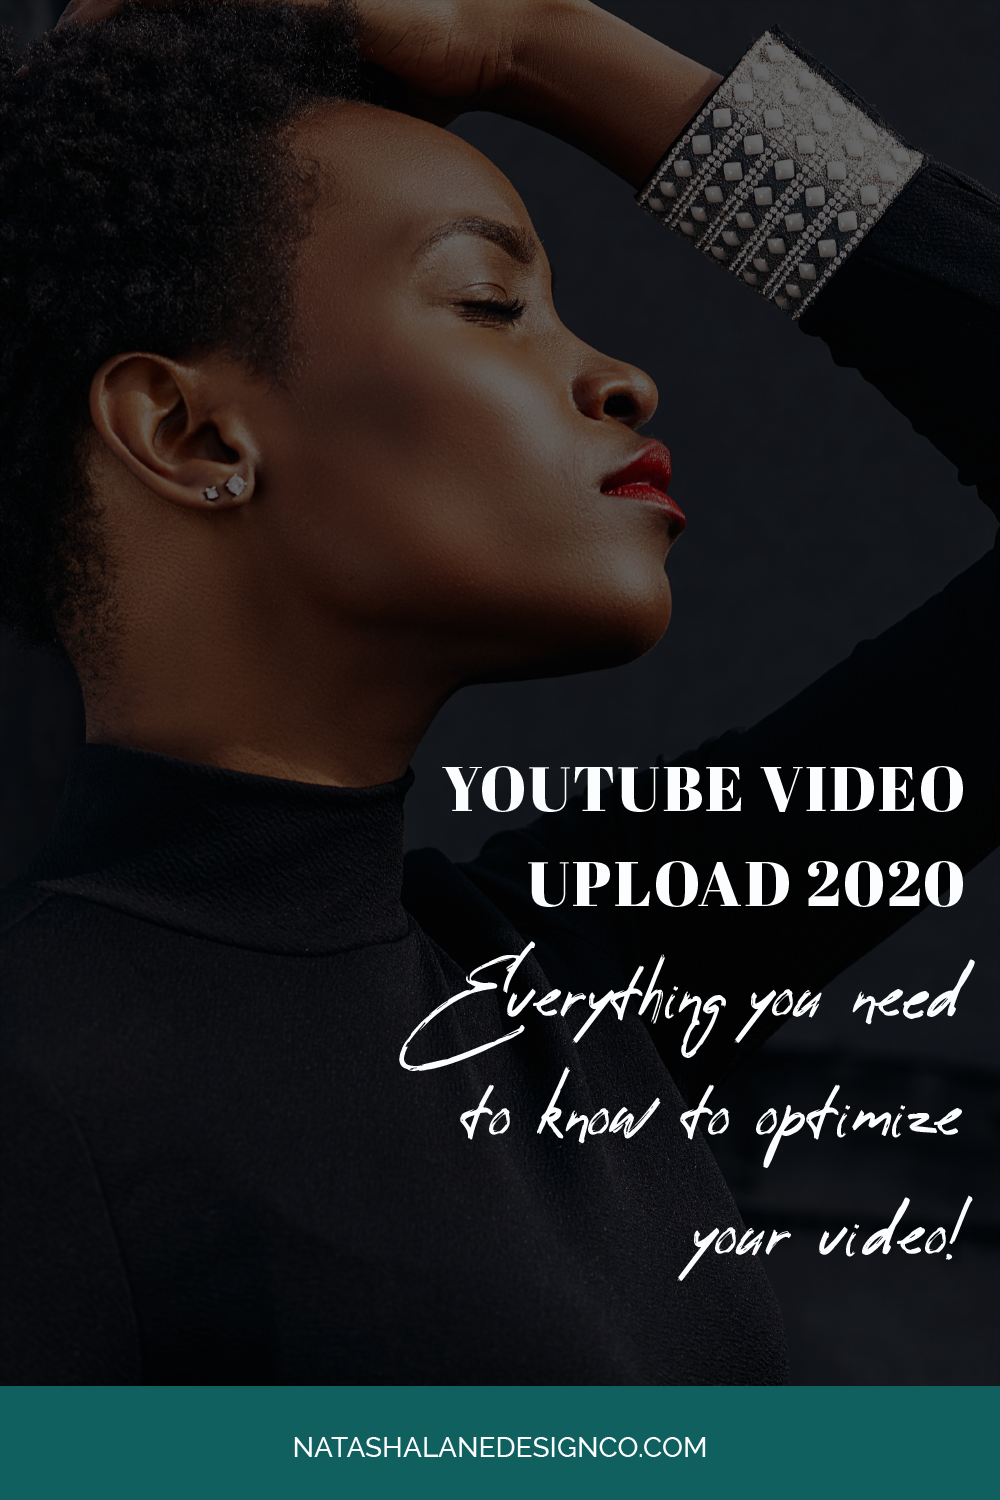 YOUTUBE VIDEO UPLOAD 2020 (Everything you need to know to optimize your video!)